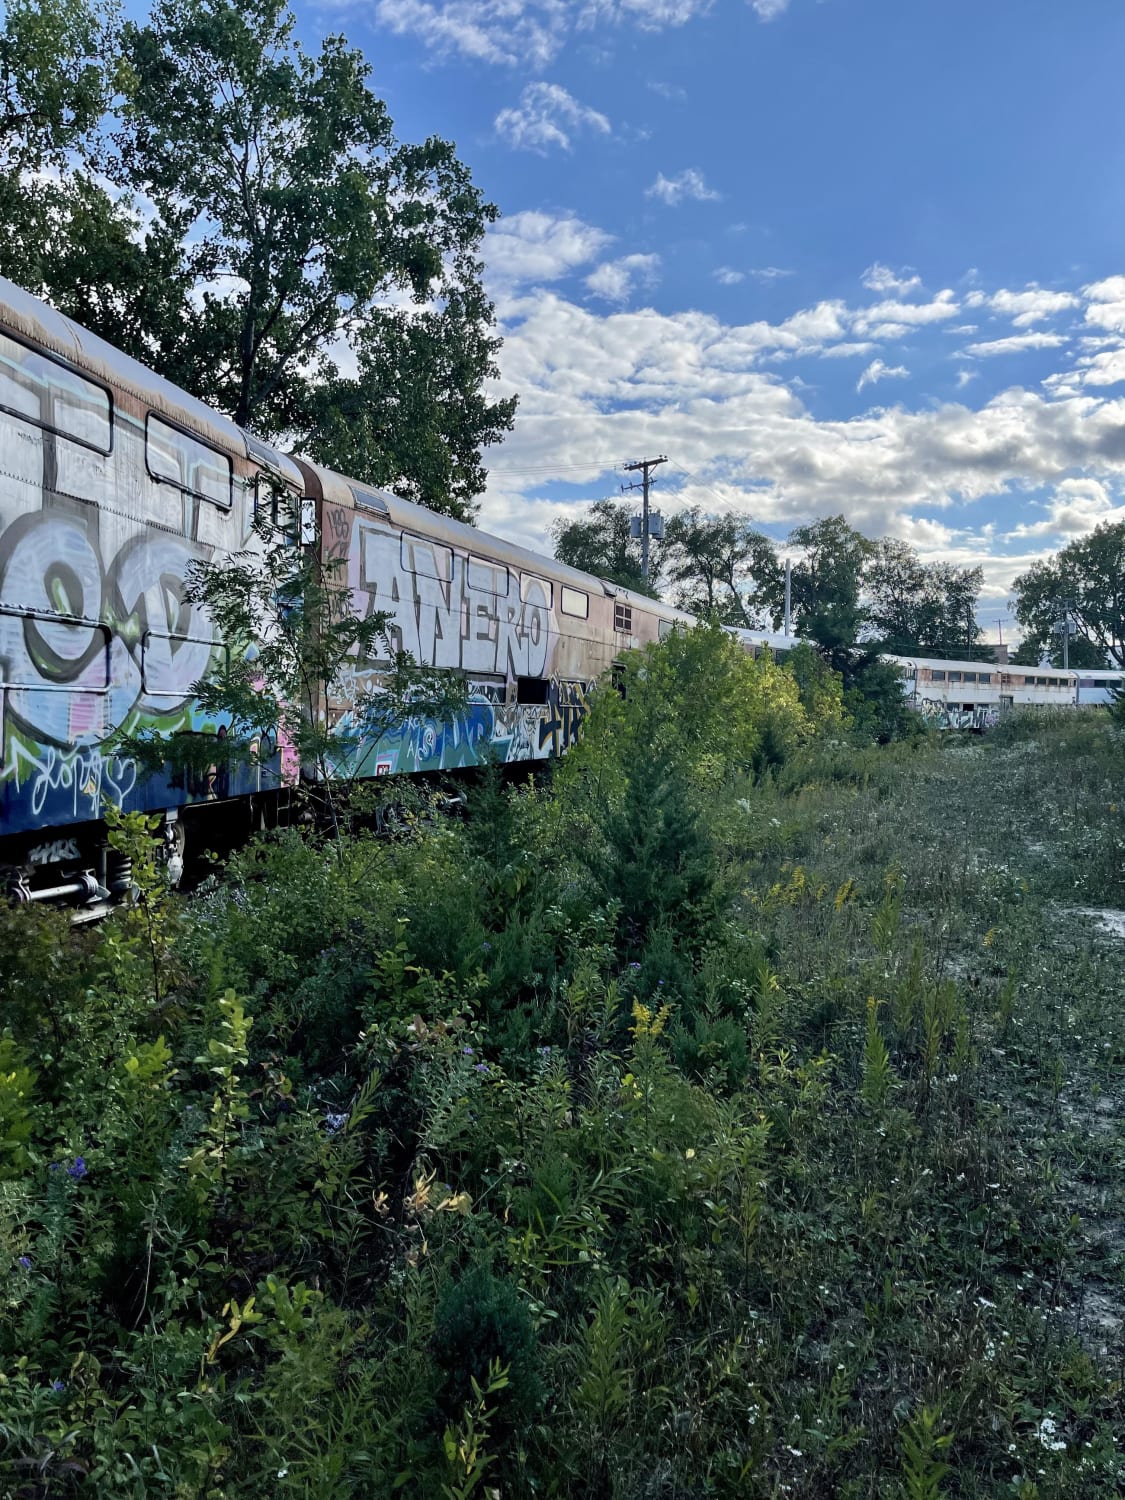 Abandoned Metra commuter train from the 90’s in Chicago, IL